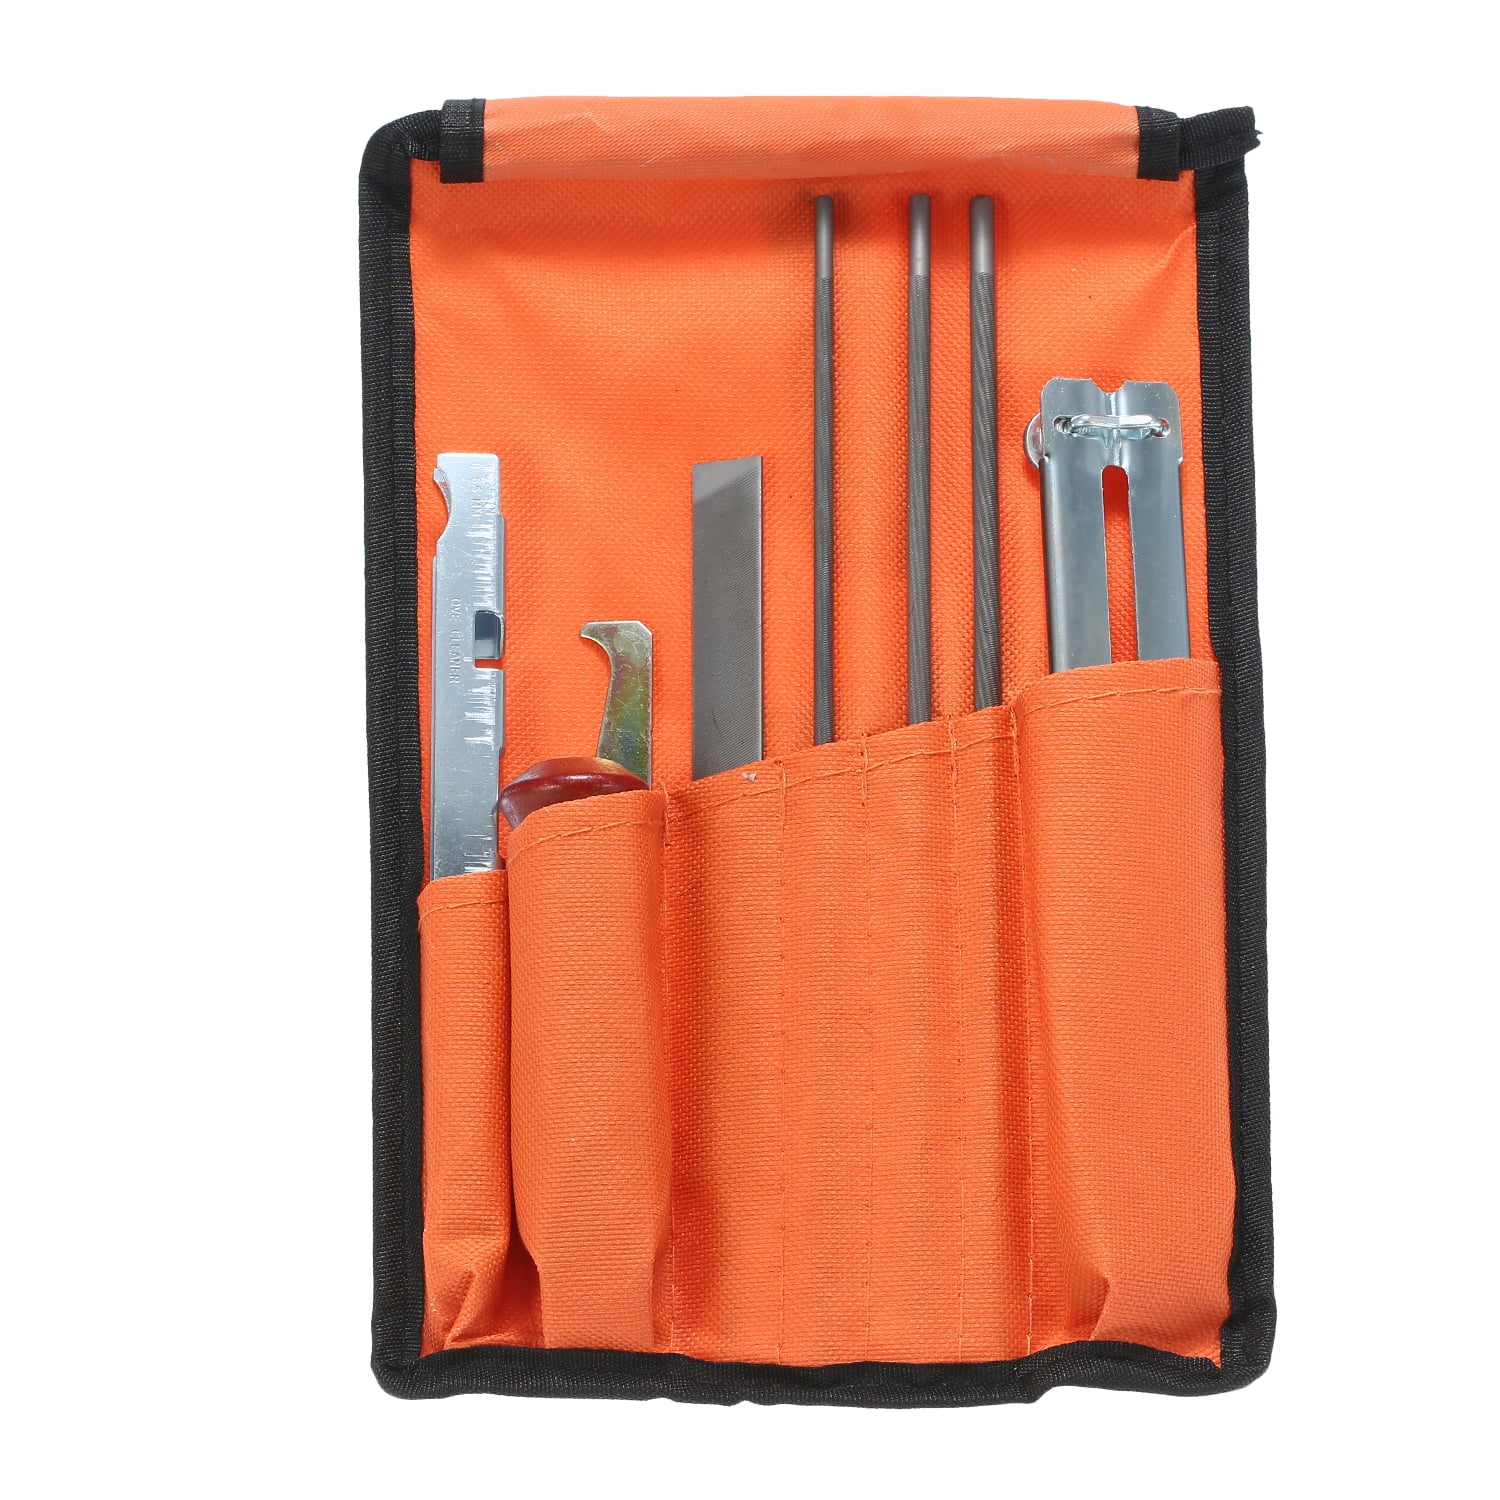 OREGON CHAINSAW SHARPENING FILING KIT IN POUCH SELECT KIT FROM DROP DOWN MENU 